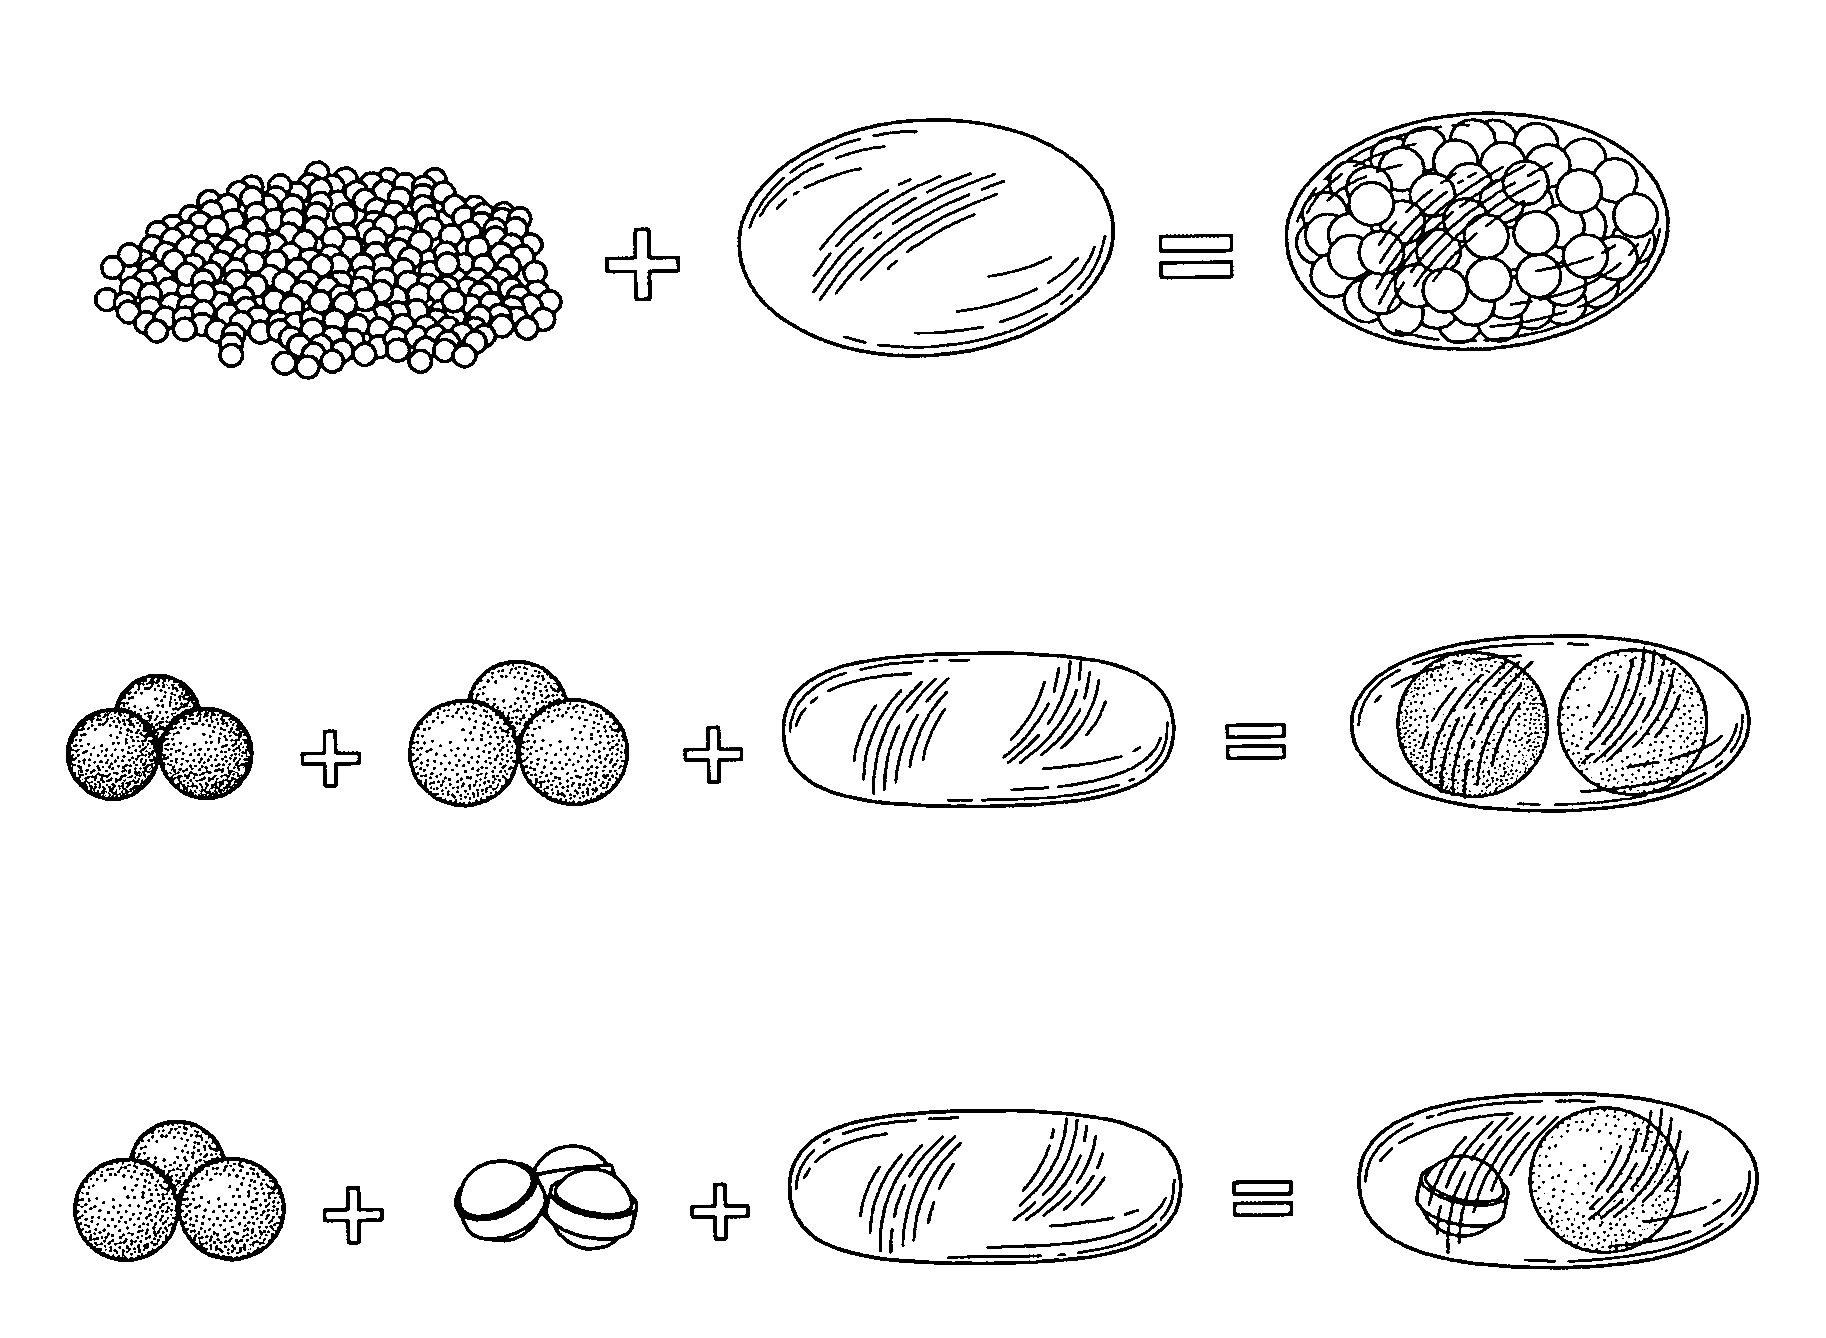 Apparatus and process for encapsulating capsules or other solid dosage forms within capsules